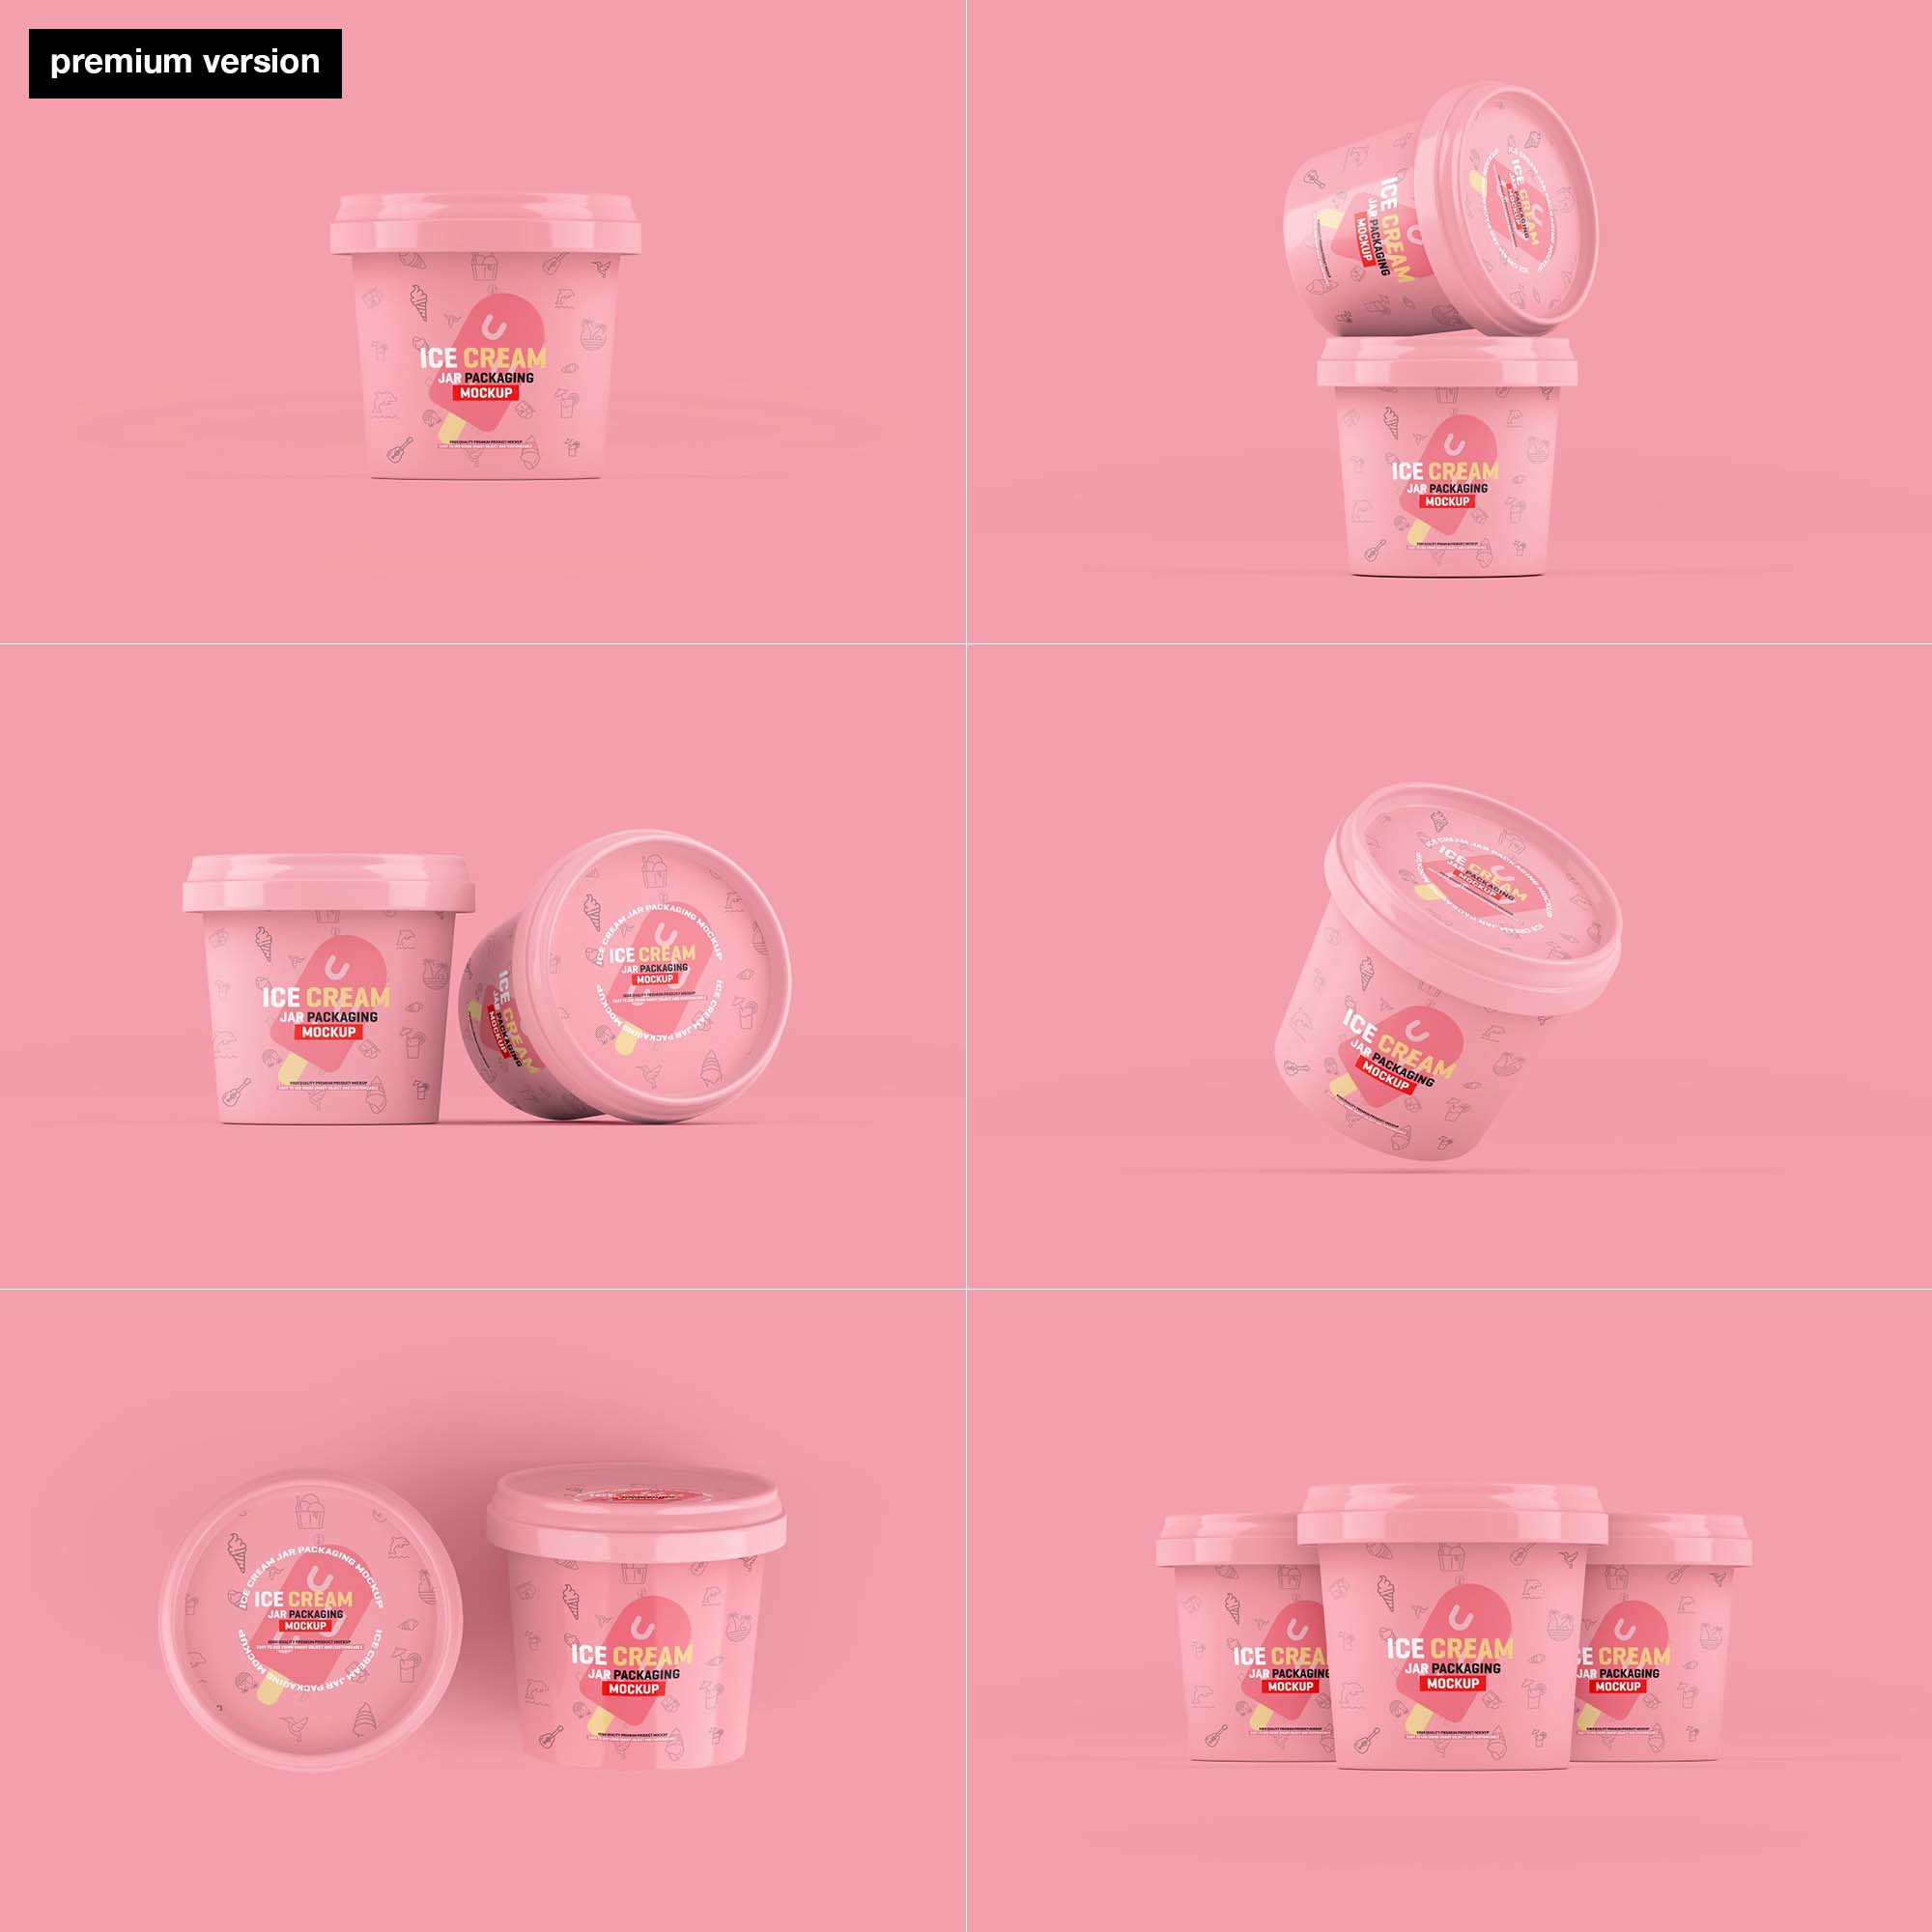 Download Ice Cream Jar Packaging Psd Mockup Free By Toasin Studio